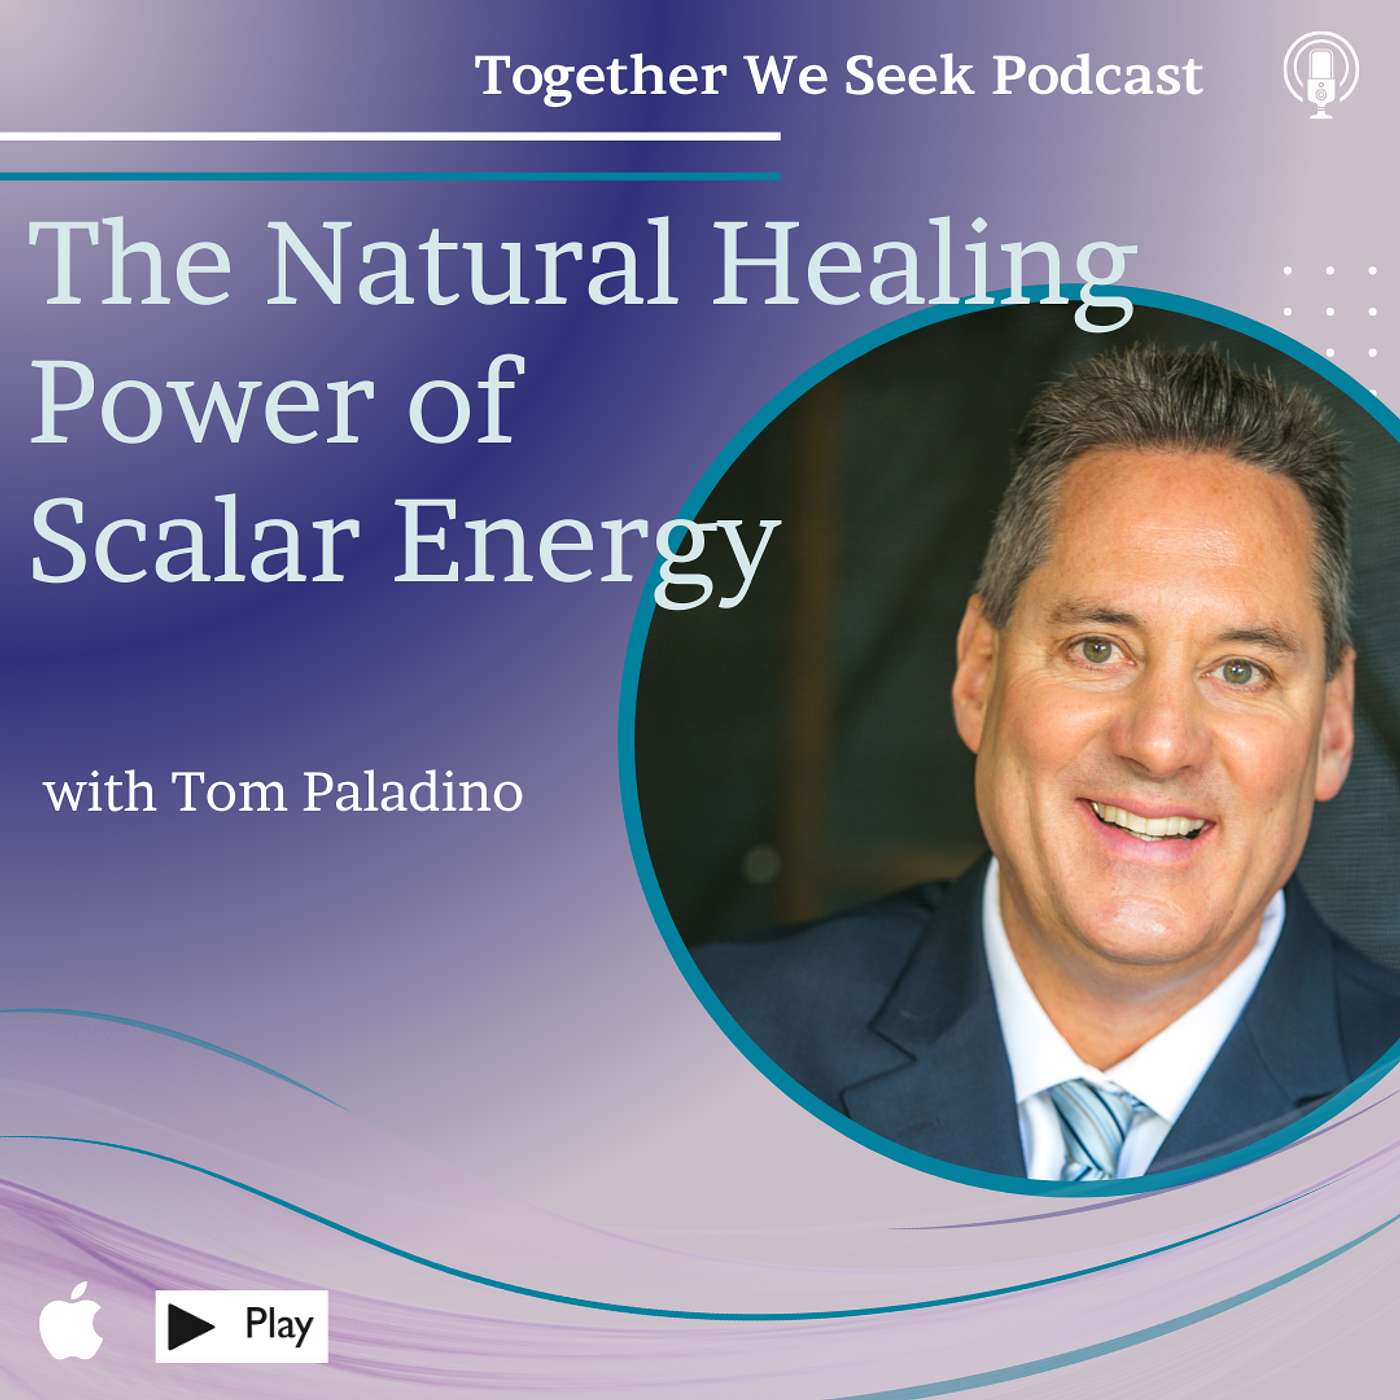 The Natural Healing Power of Scalar Energy with Tom Paladino